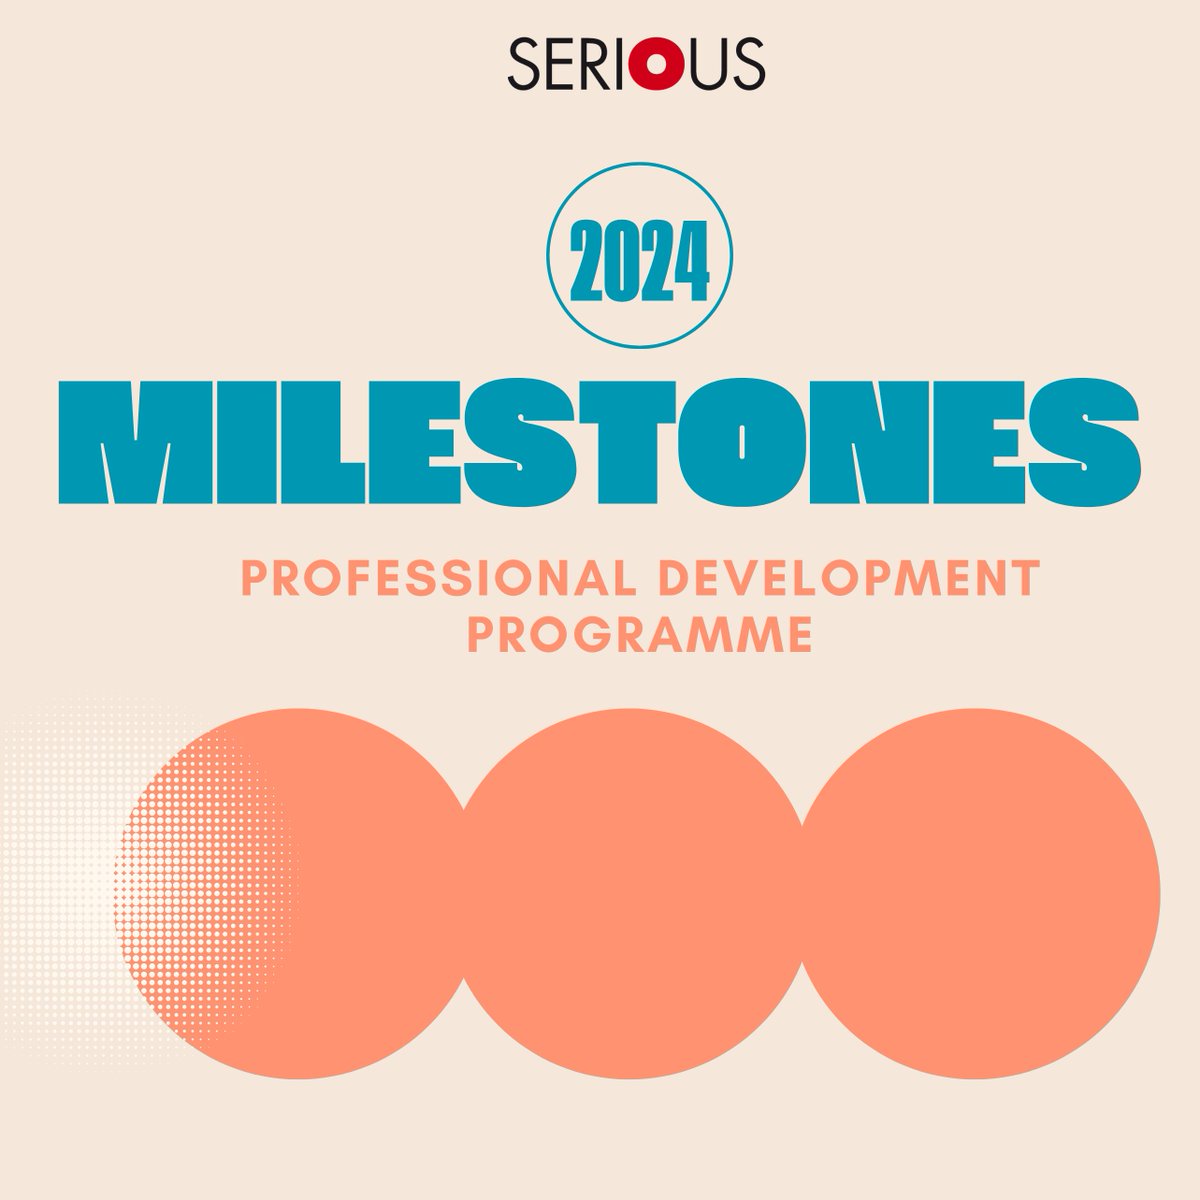 🚨 Last chance to apply to our professional development programme Milestones Are you aged 18 - 23 years old and wanting to build a career in the live music industry? Find out more and apply at serious.org.uk/milestones Deadline: 5pm TOMORROW!